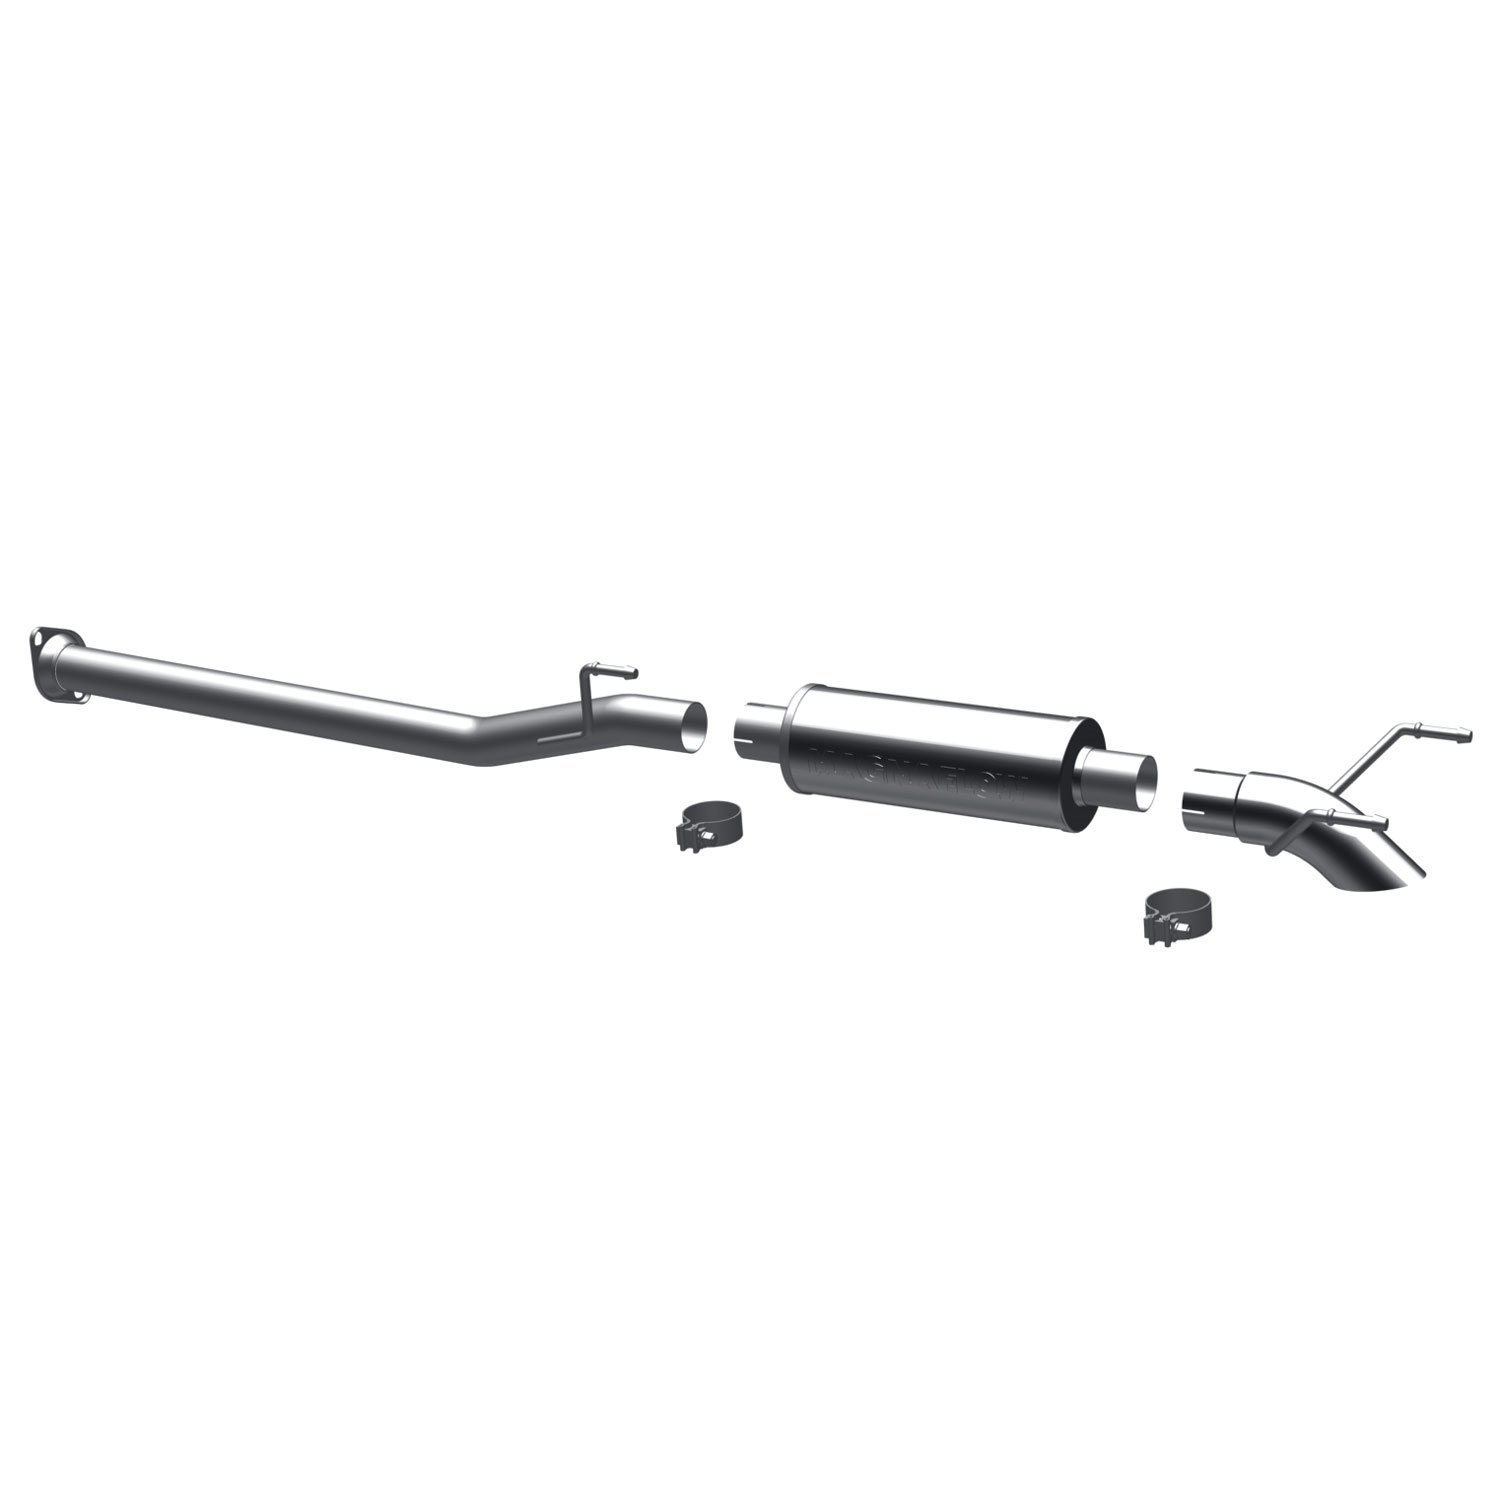 Pro Series Off-Road Cat-Back Exhaust System 2005-12 Tacoma 4.0L (Ext./Crew Cab, 60.3" Bed)